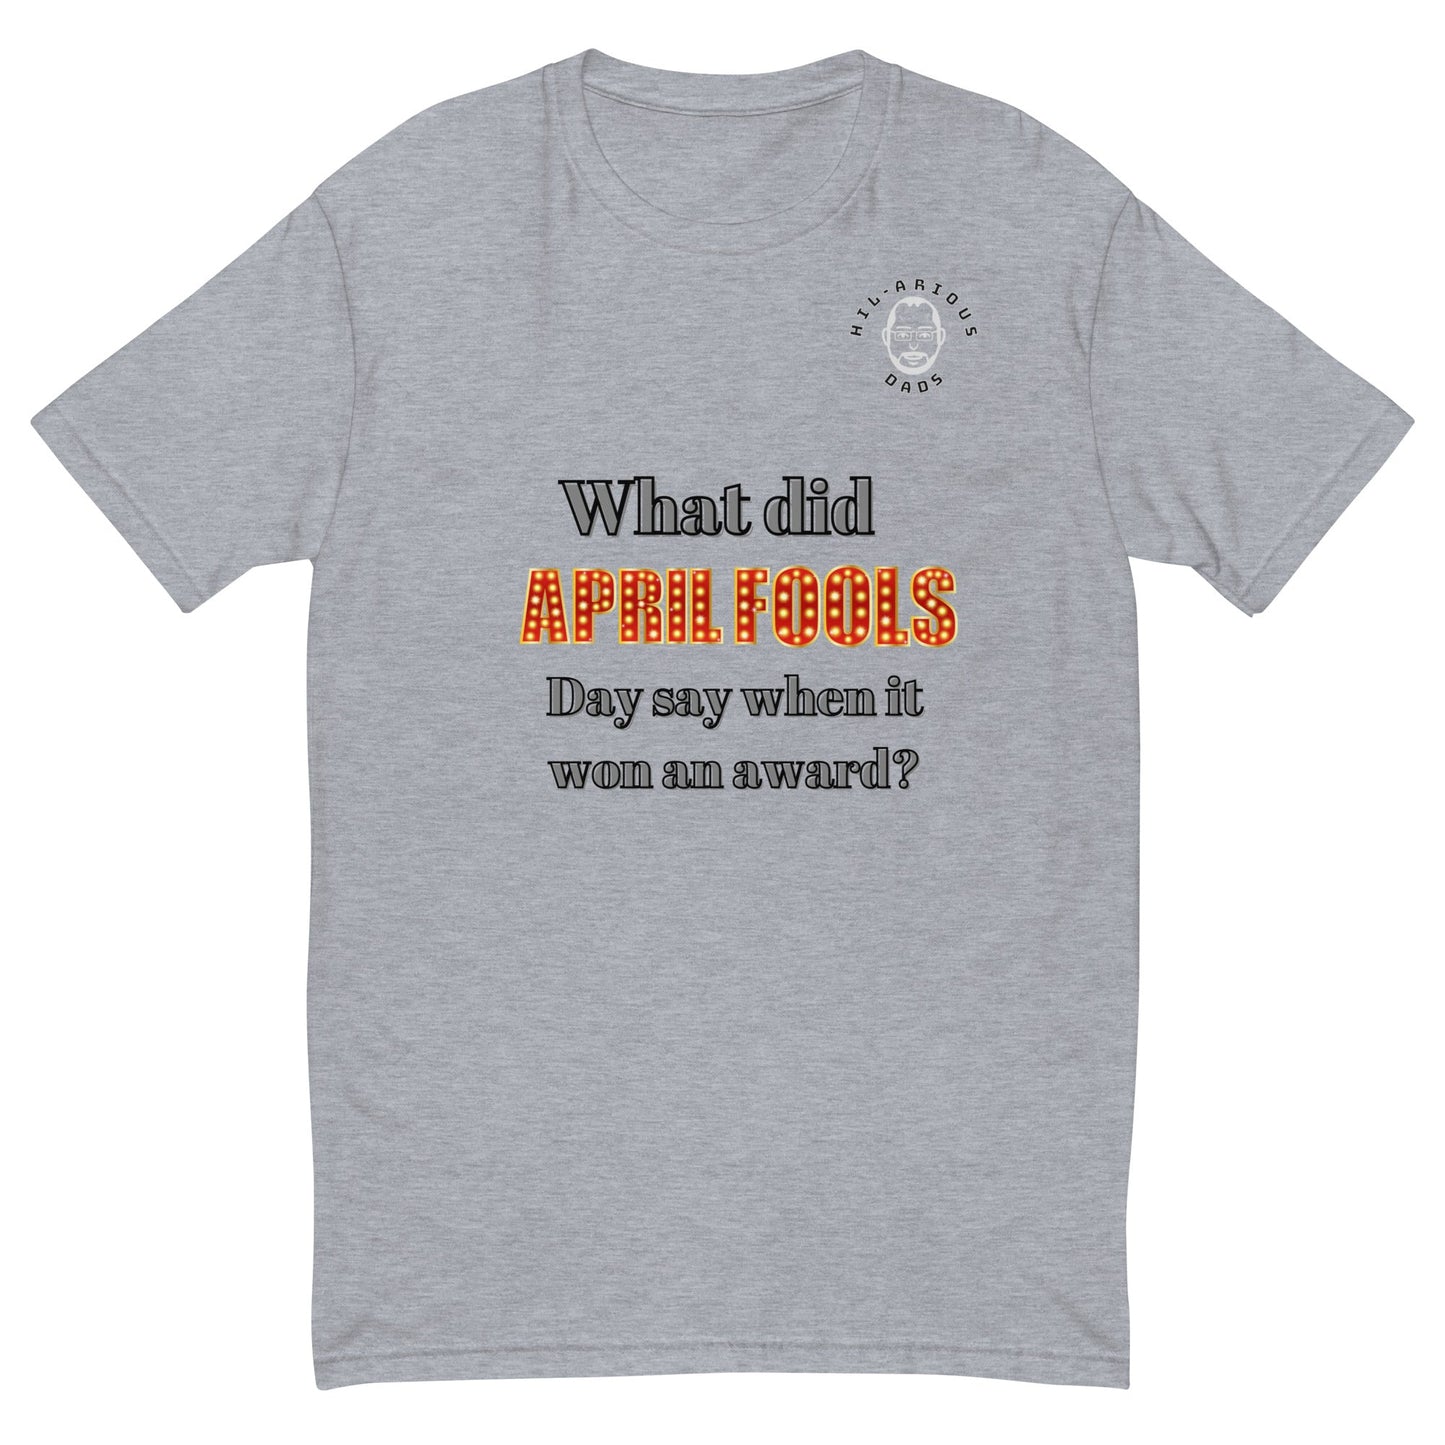 What did April Fools Day say when it won an award?-T-shirt - Hil-arious Dads